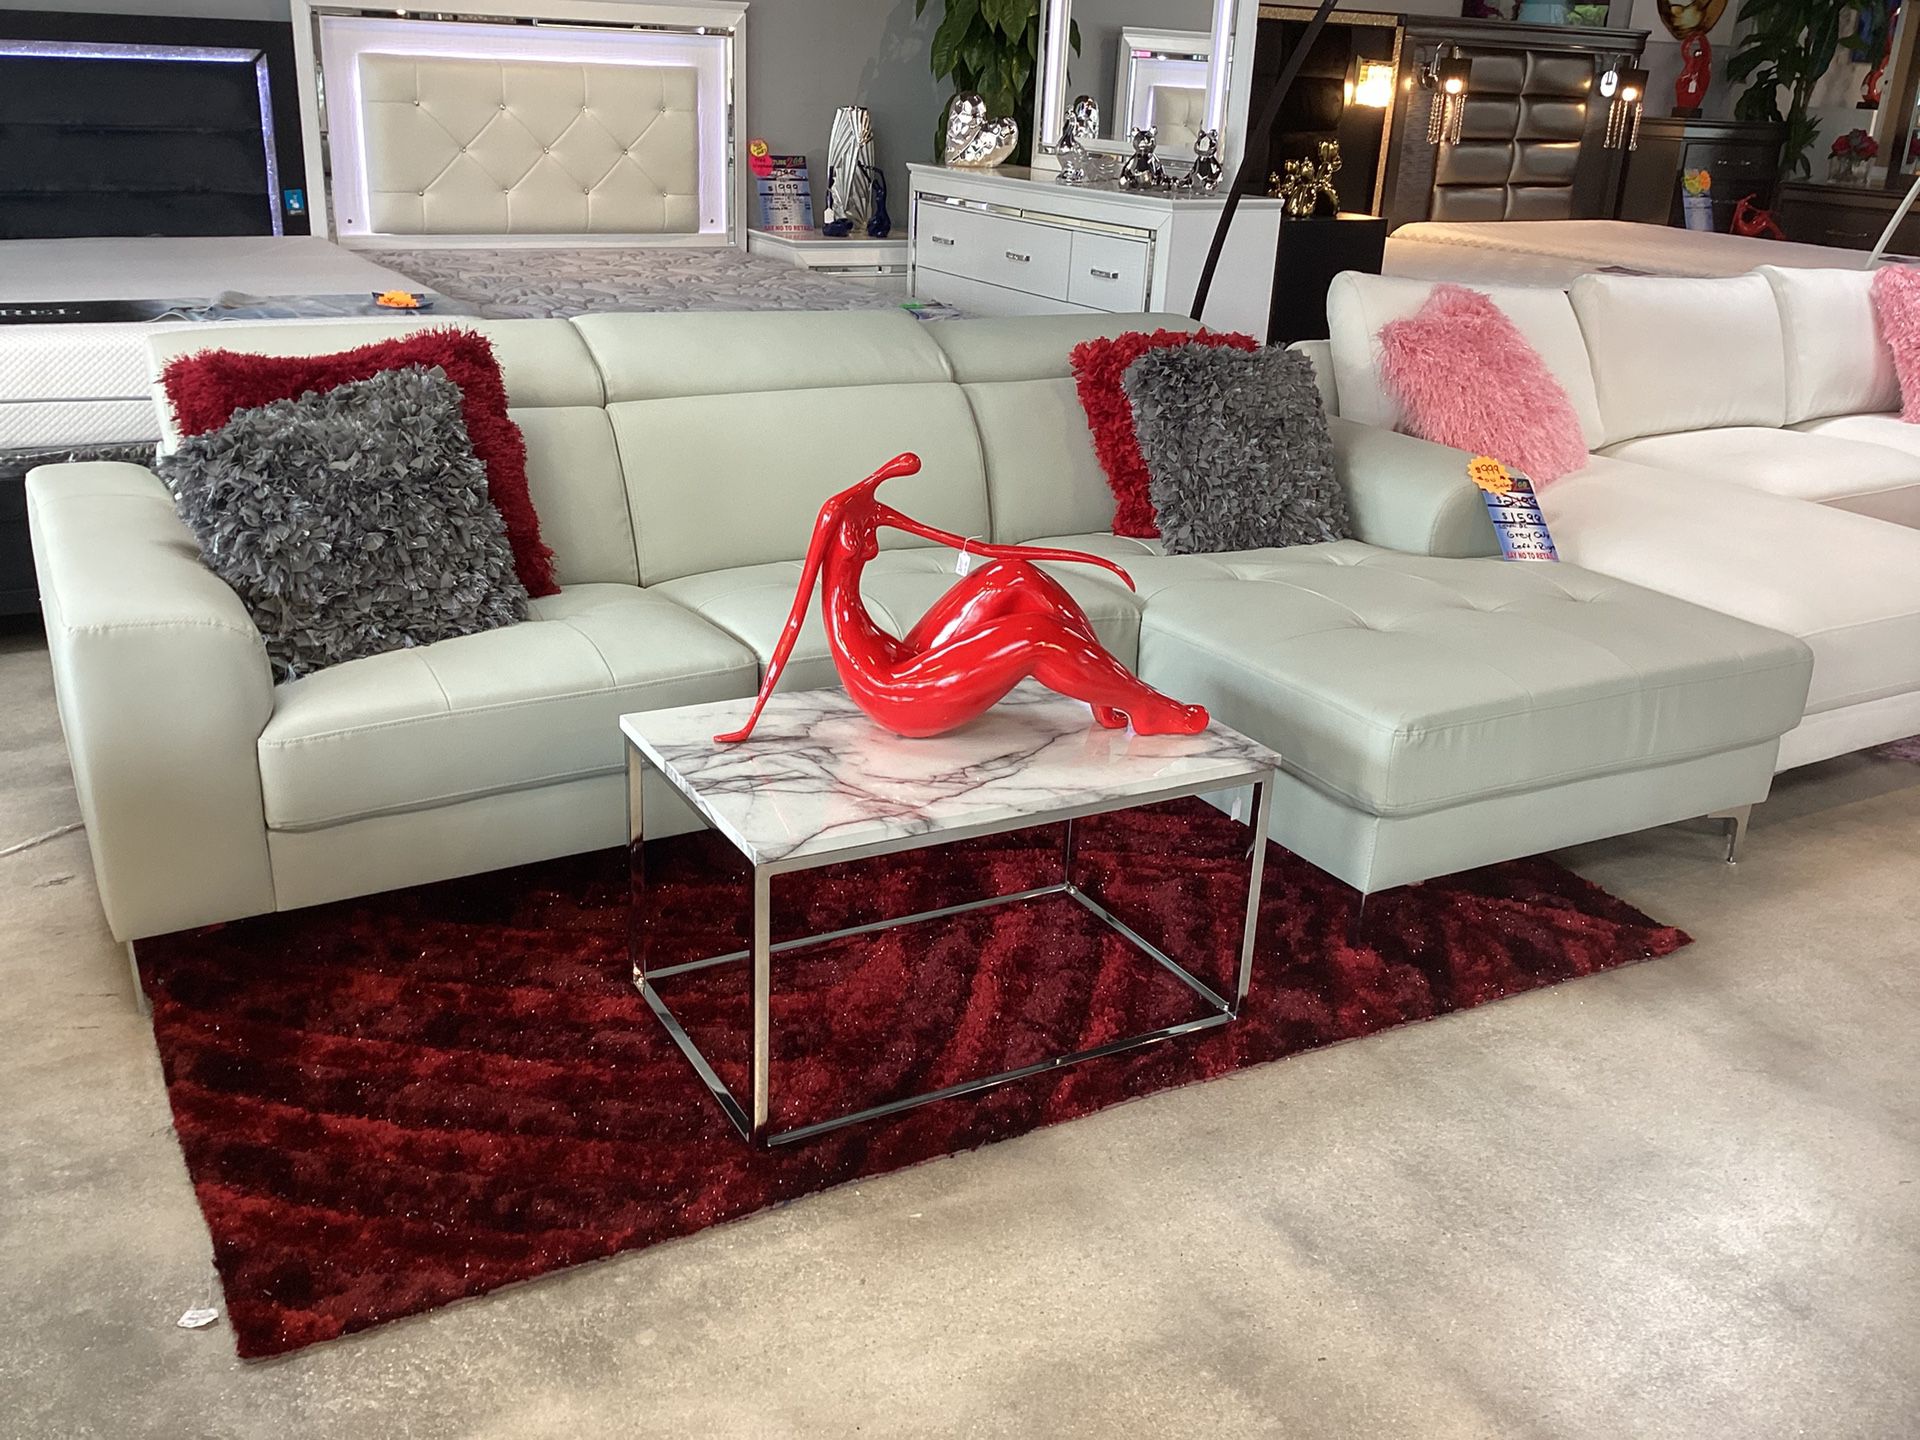 Beautiful Furniture Sofa Sectional L On Sale Now For $799 Color White/Gray/Black Are Available 